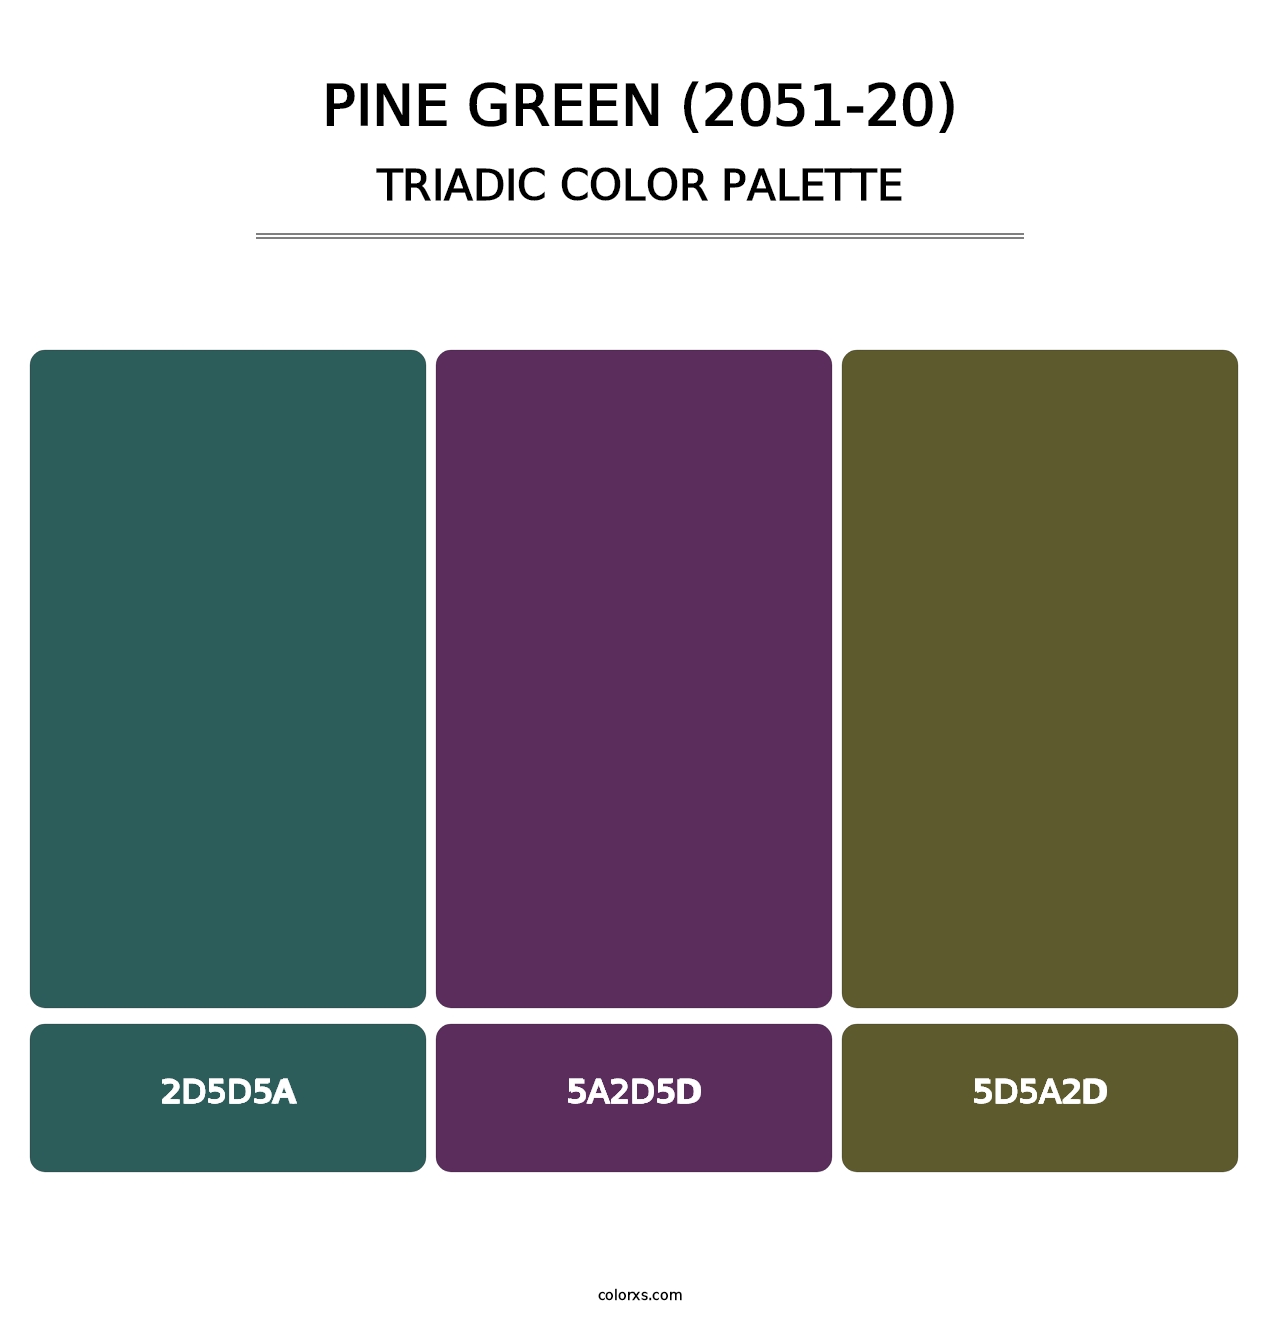 Pine Green (2051-20) - Triadic Color Palette